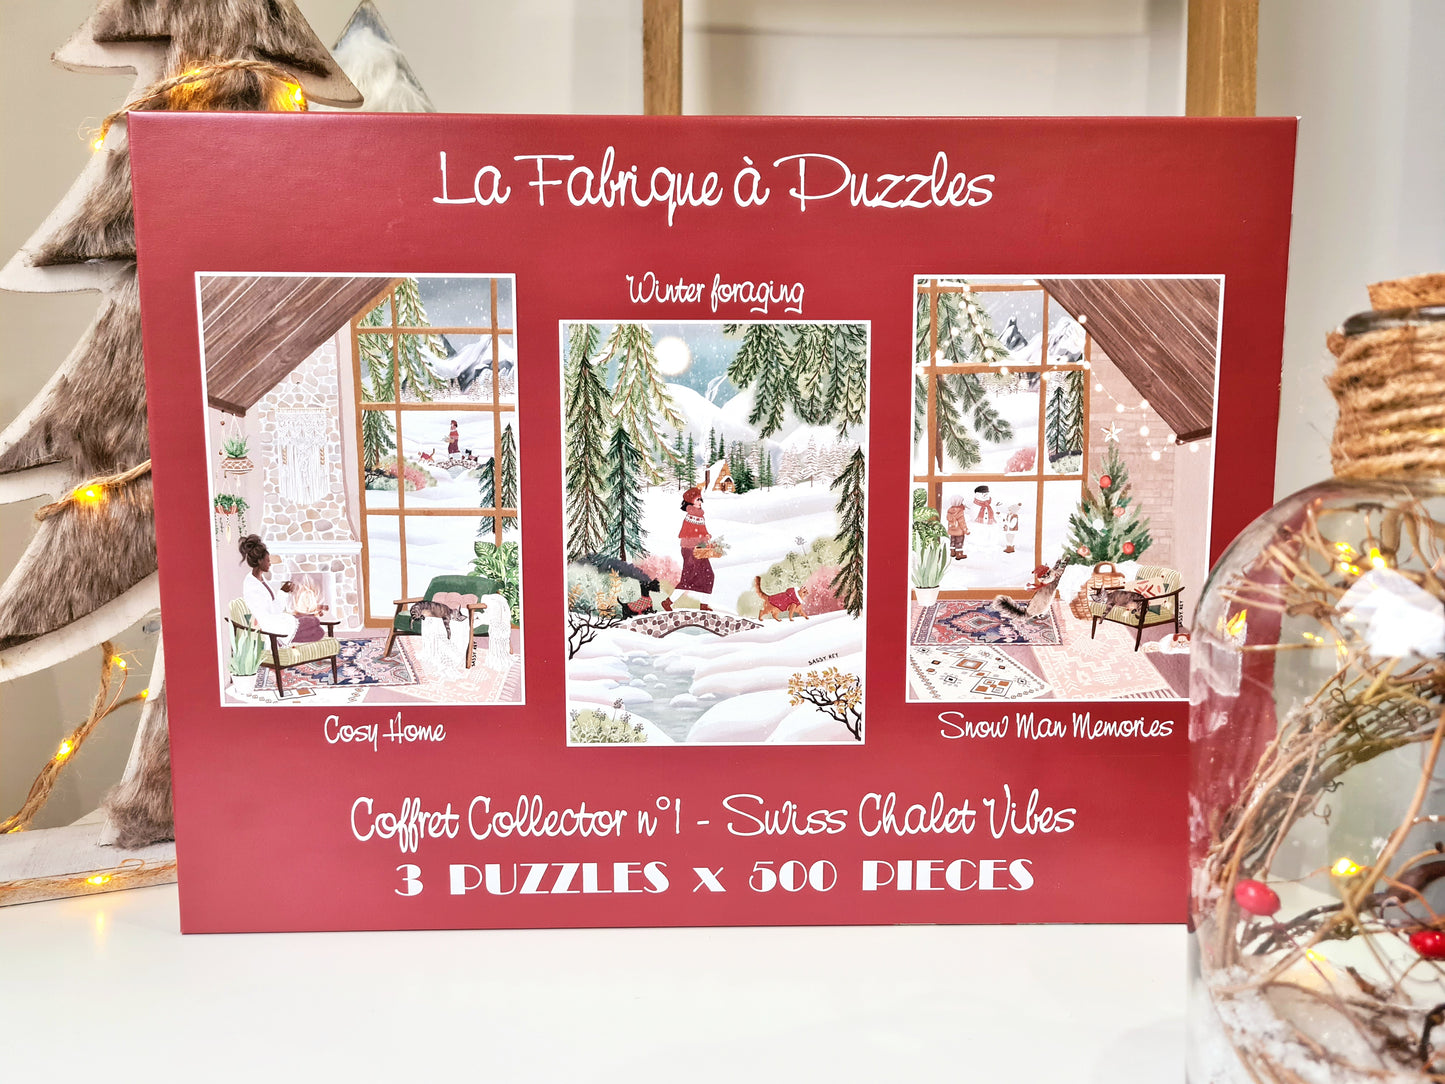 Coffret Collector n°1 "Swiss Chalet Vibes" 3 puzzles 500 pièces